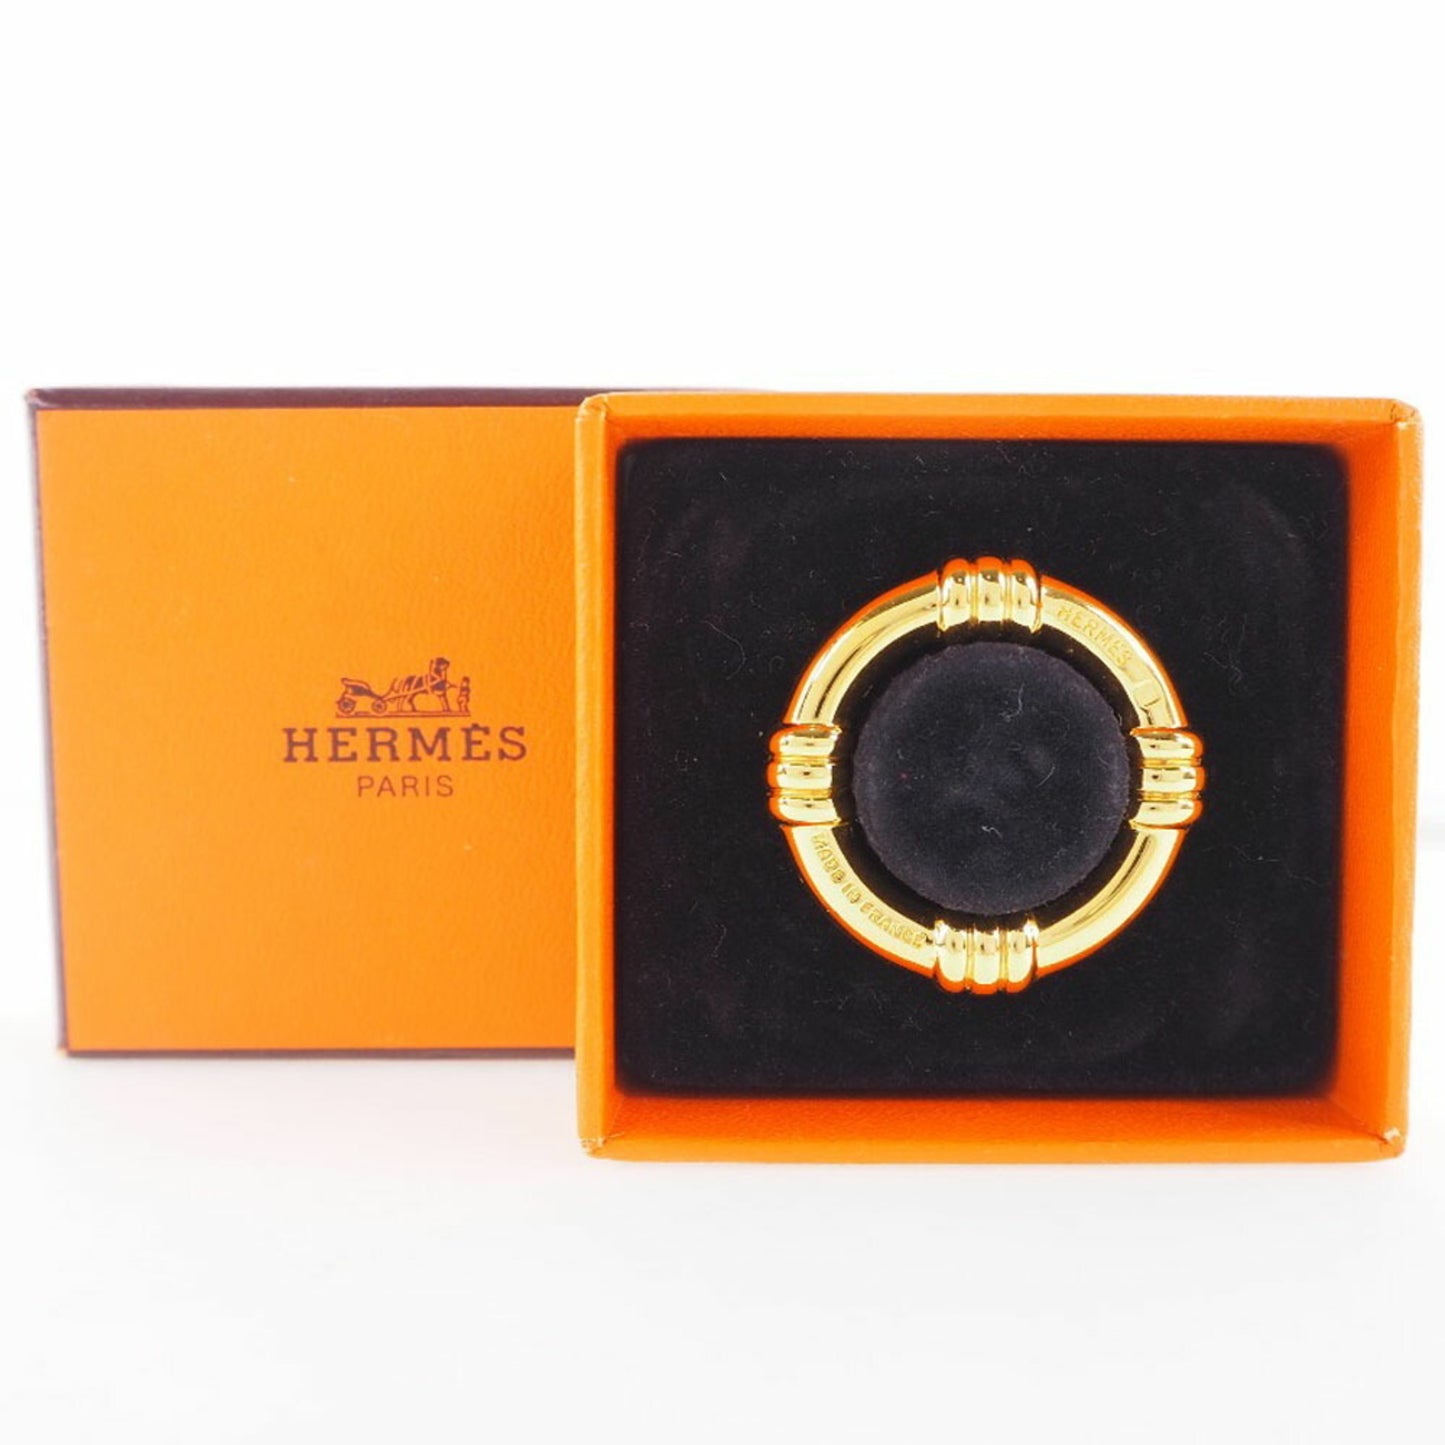 Hermes Women's Gold Metal Hermes Box - Excellent Condition - Vintage in Gold